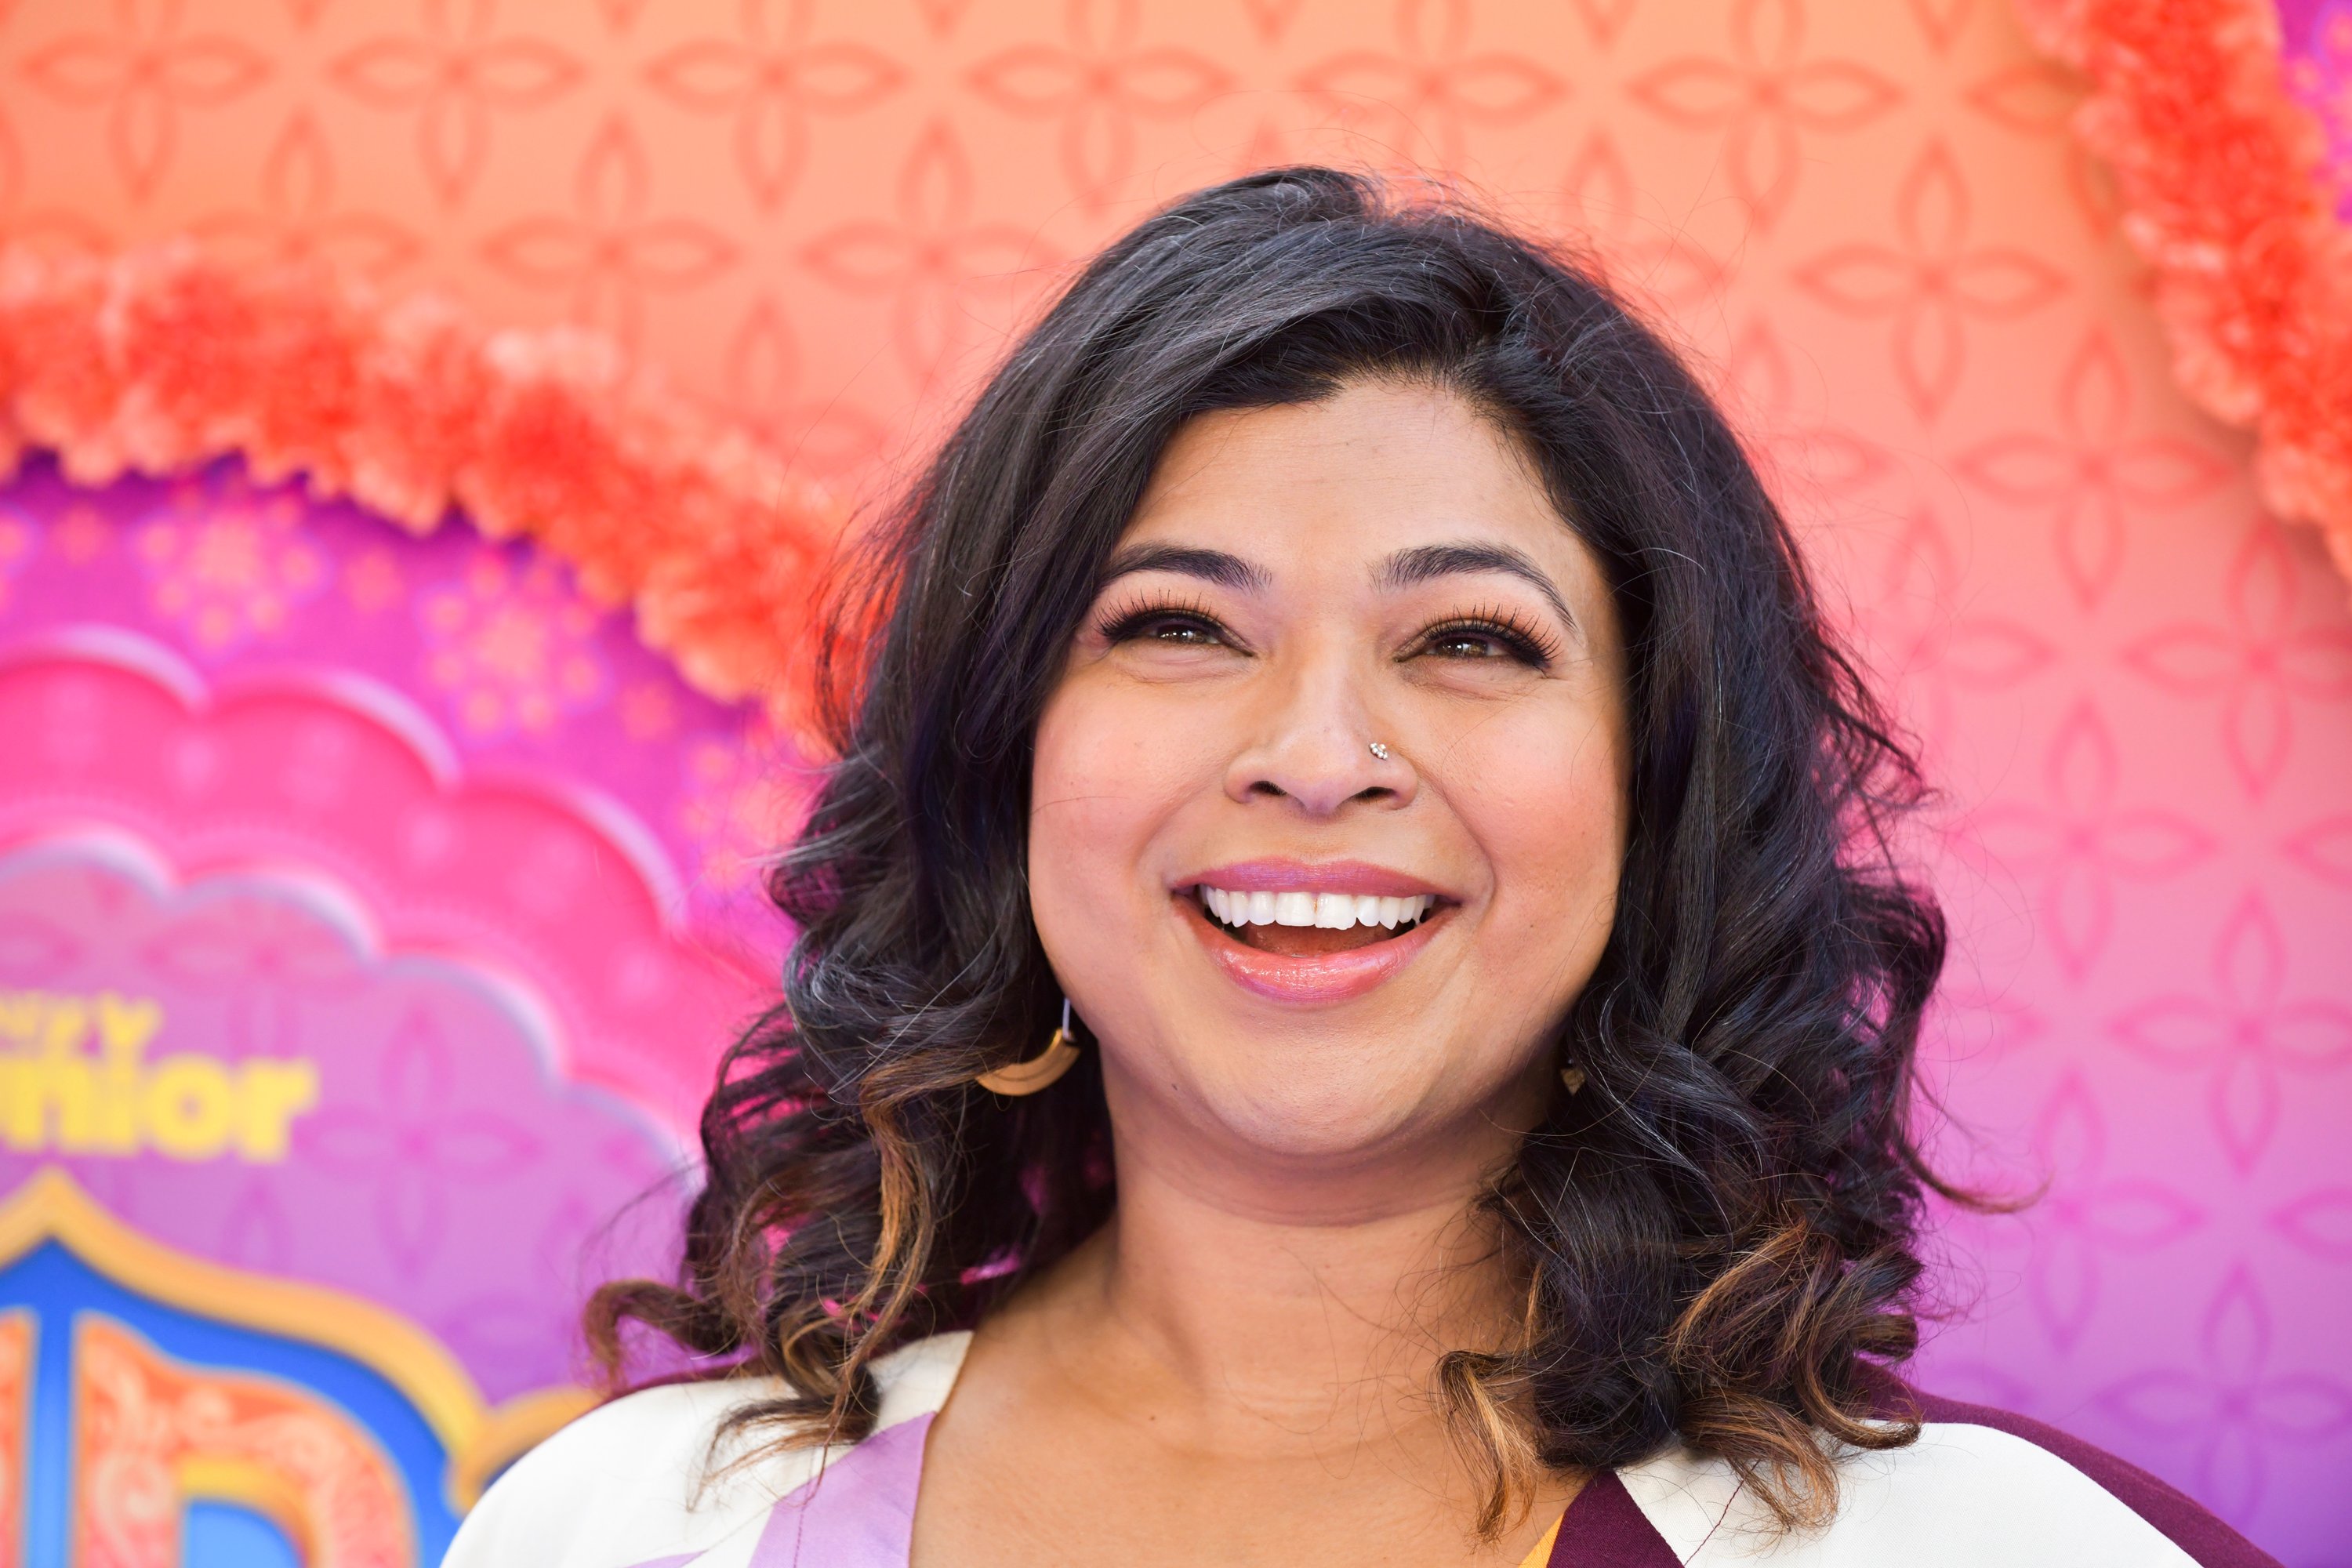 Food Network personality Aarti Sequeira